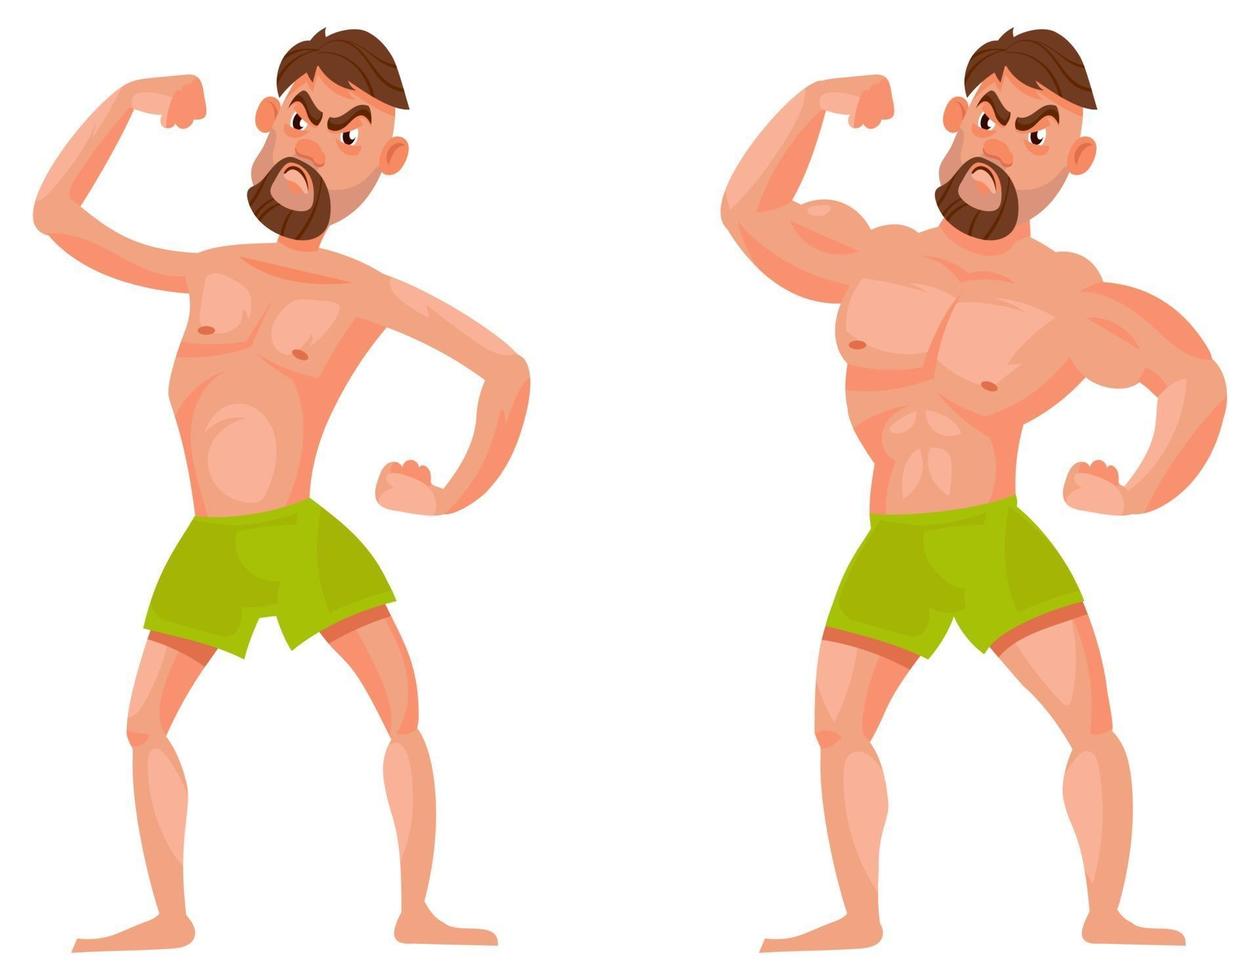 Man before and after going to gym. vector